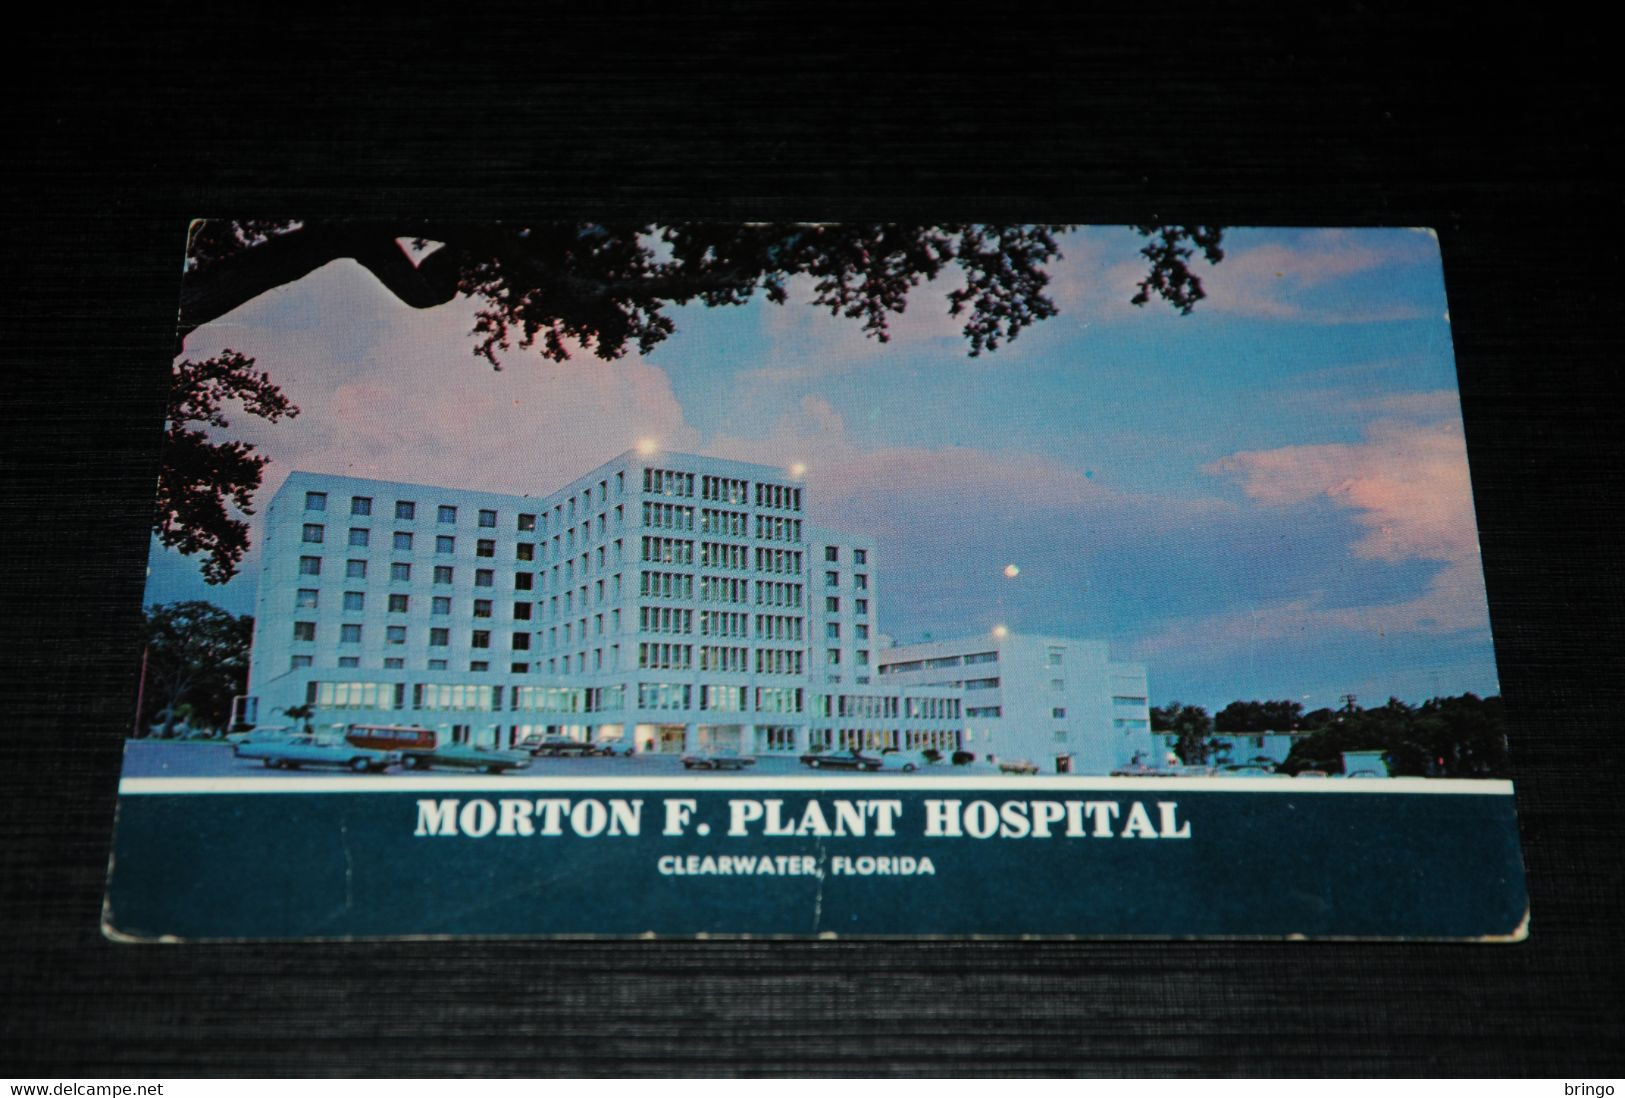 21396-               MORTON F. PLANT HOSPITAL, CLEARWATER, FLORIDA - Clearwater